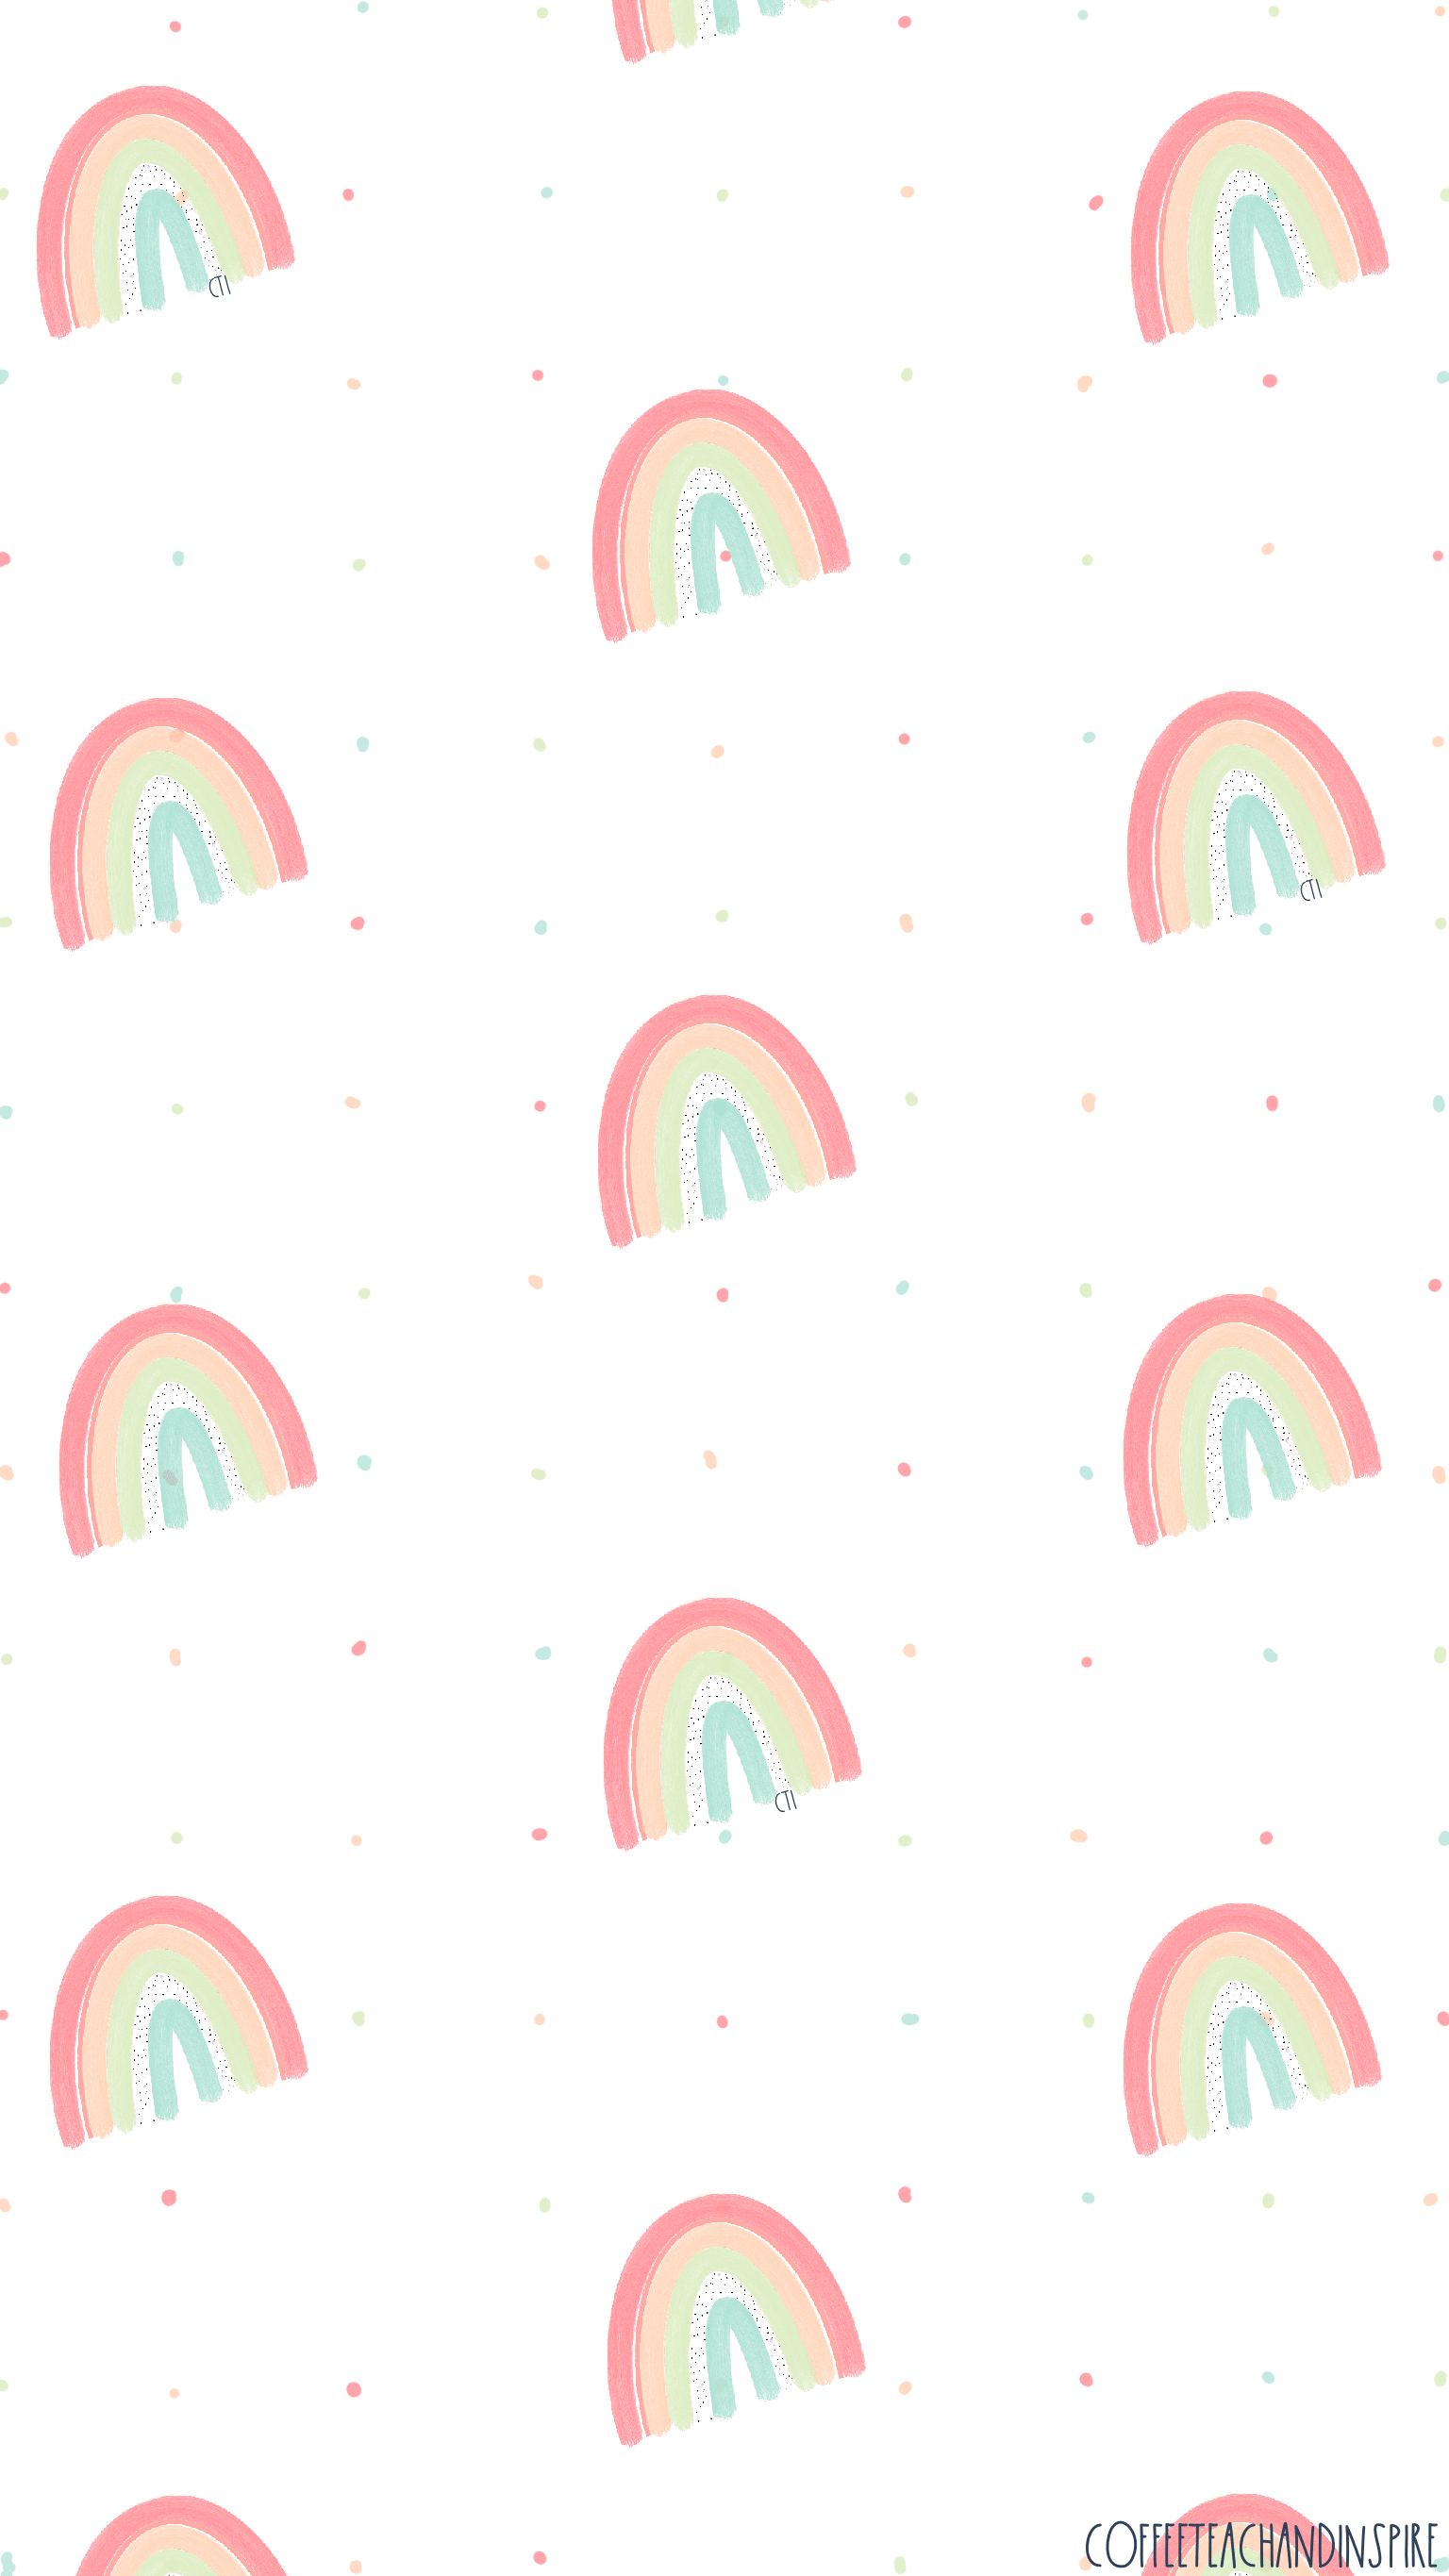 Download this free rainbow phone background for your iPhone or Android phone! - Pastel rainbow